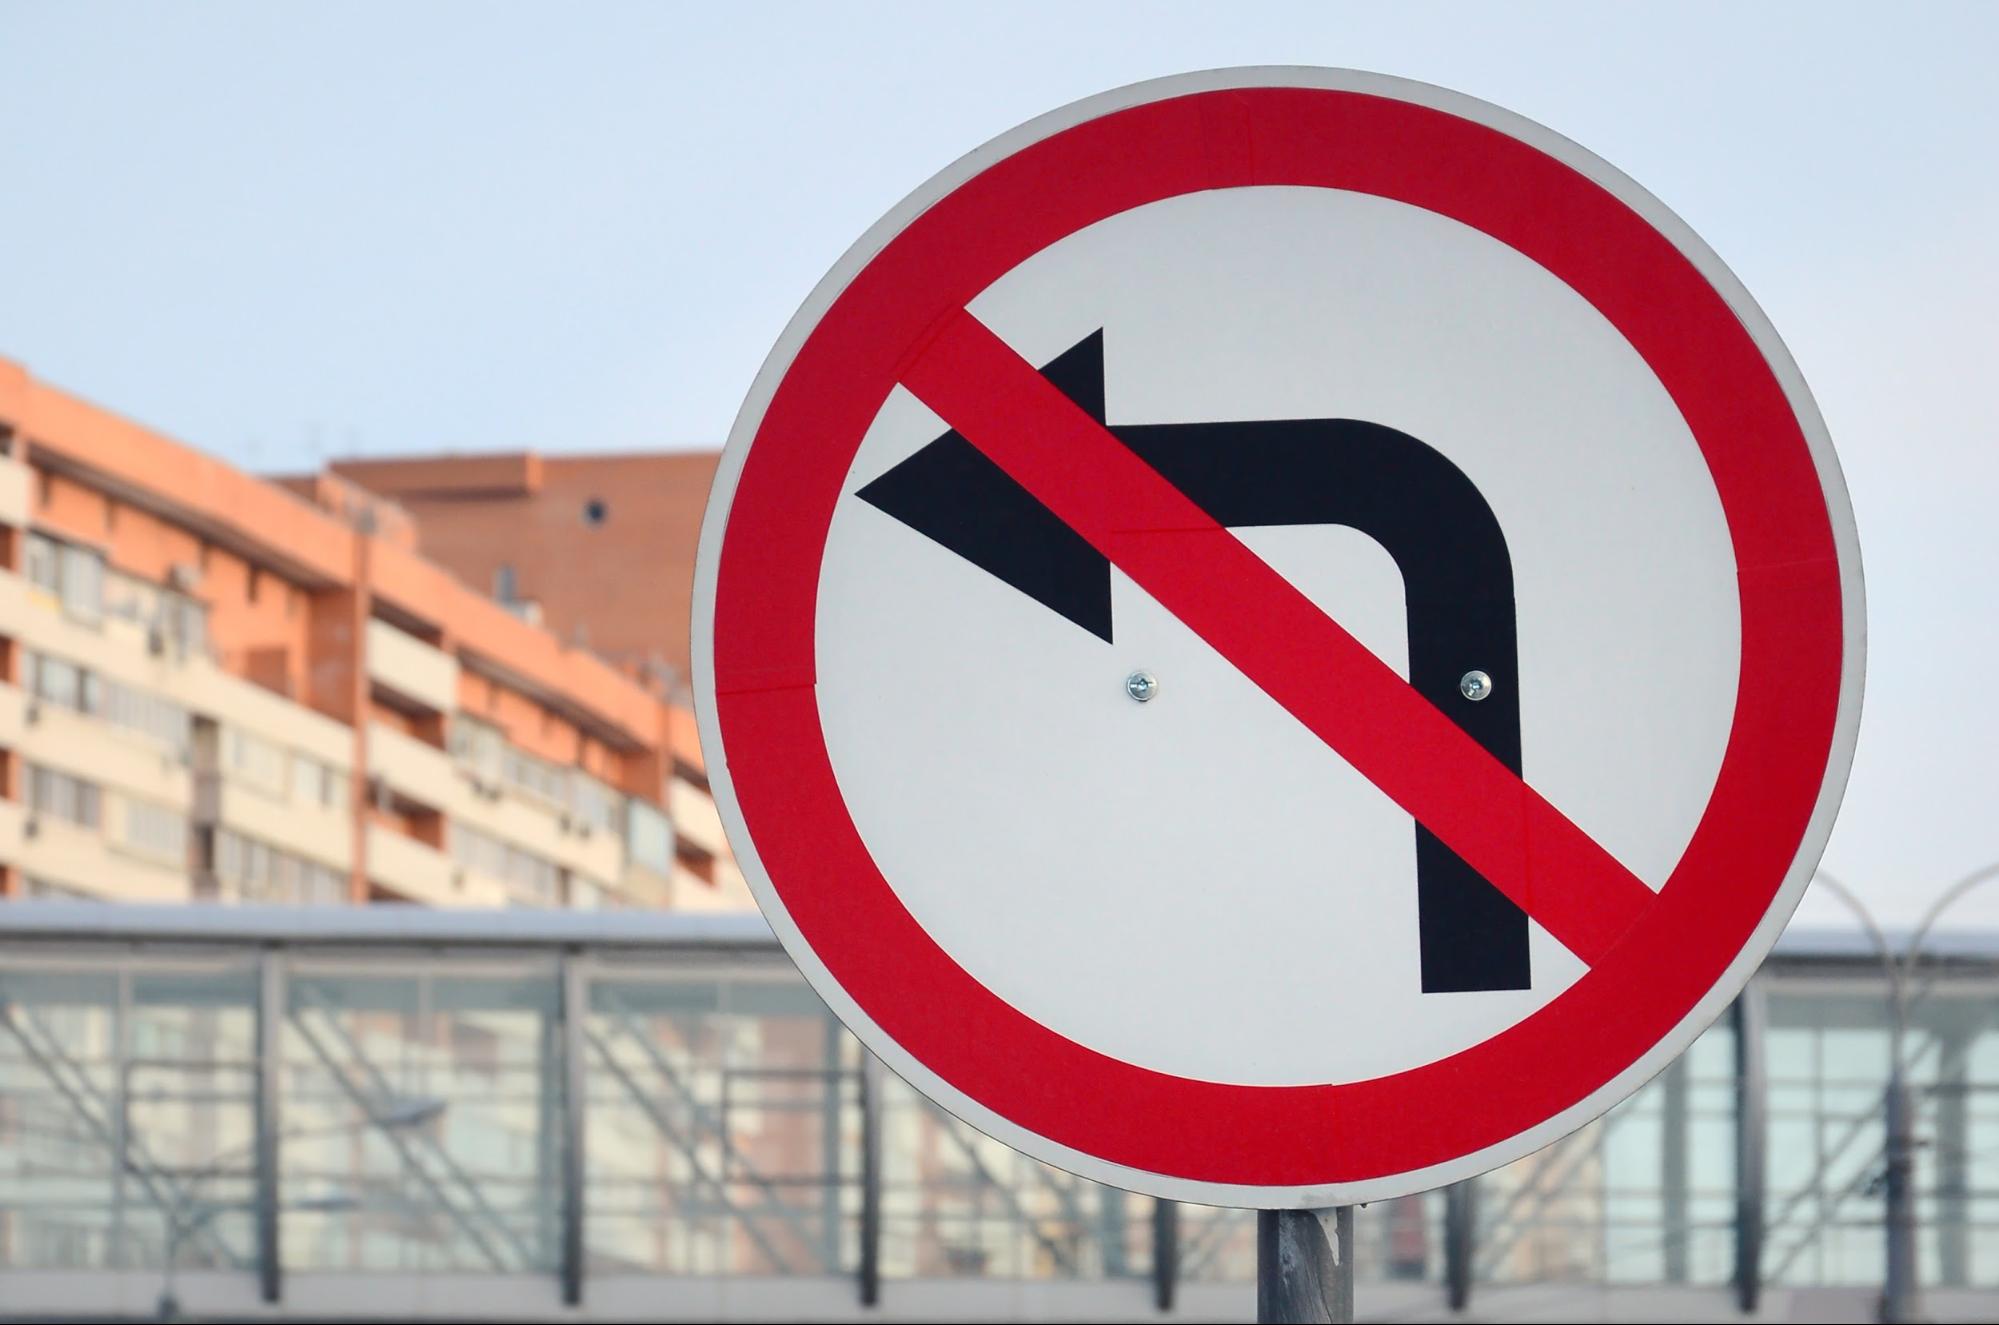 no left turns street sign showing a black arrow pointing left surrounded by a red circle with a red line through the circle